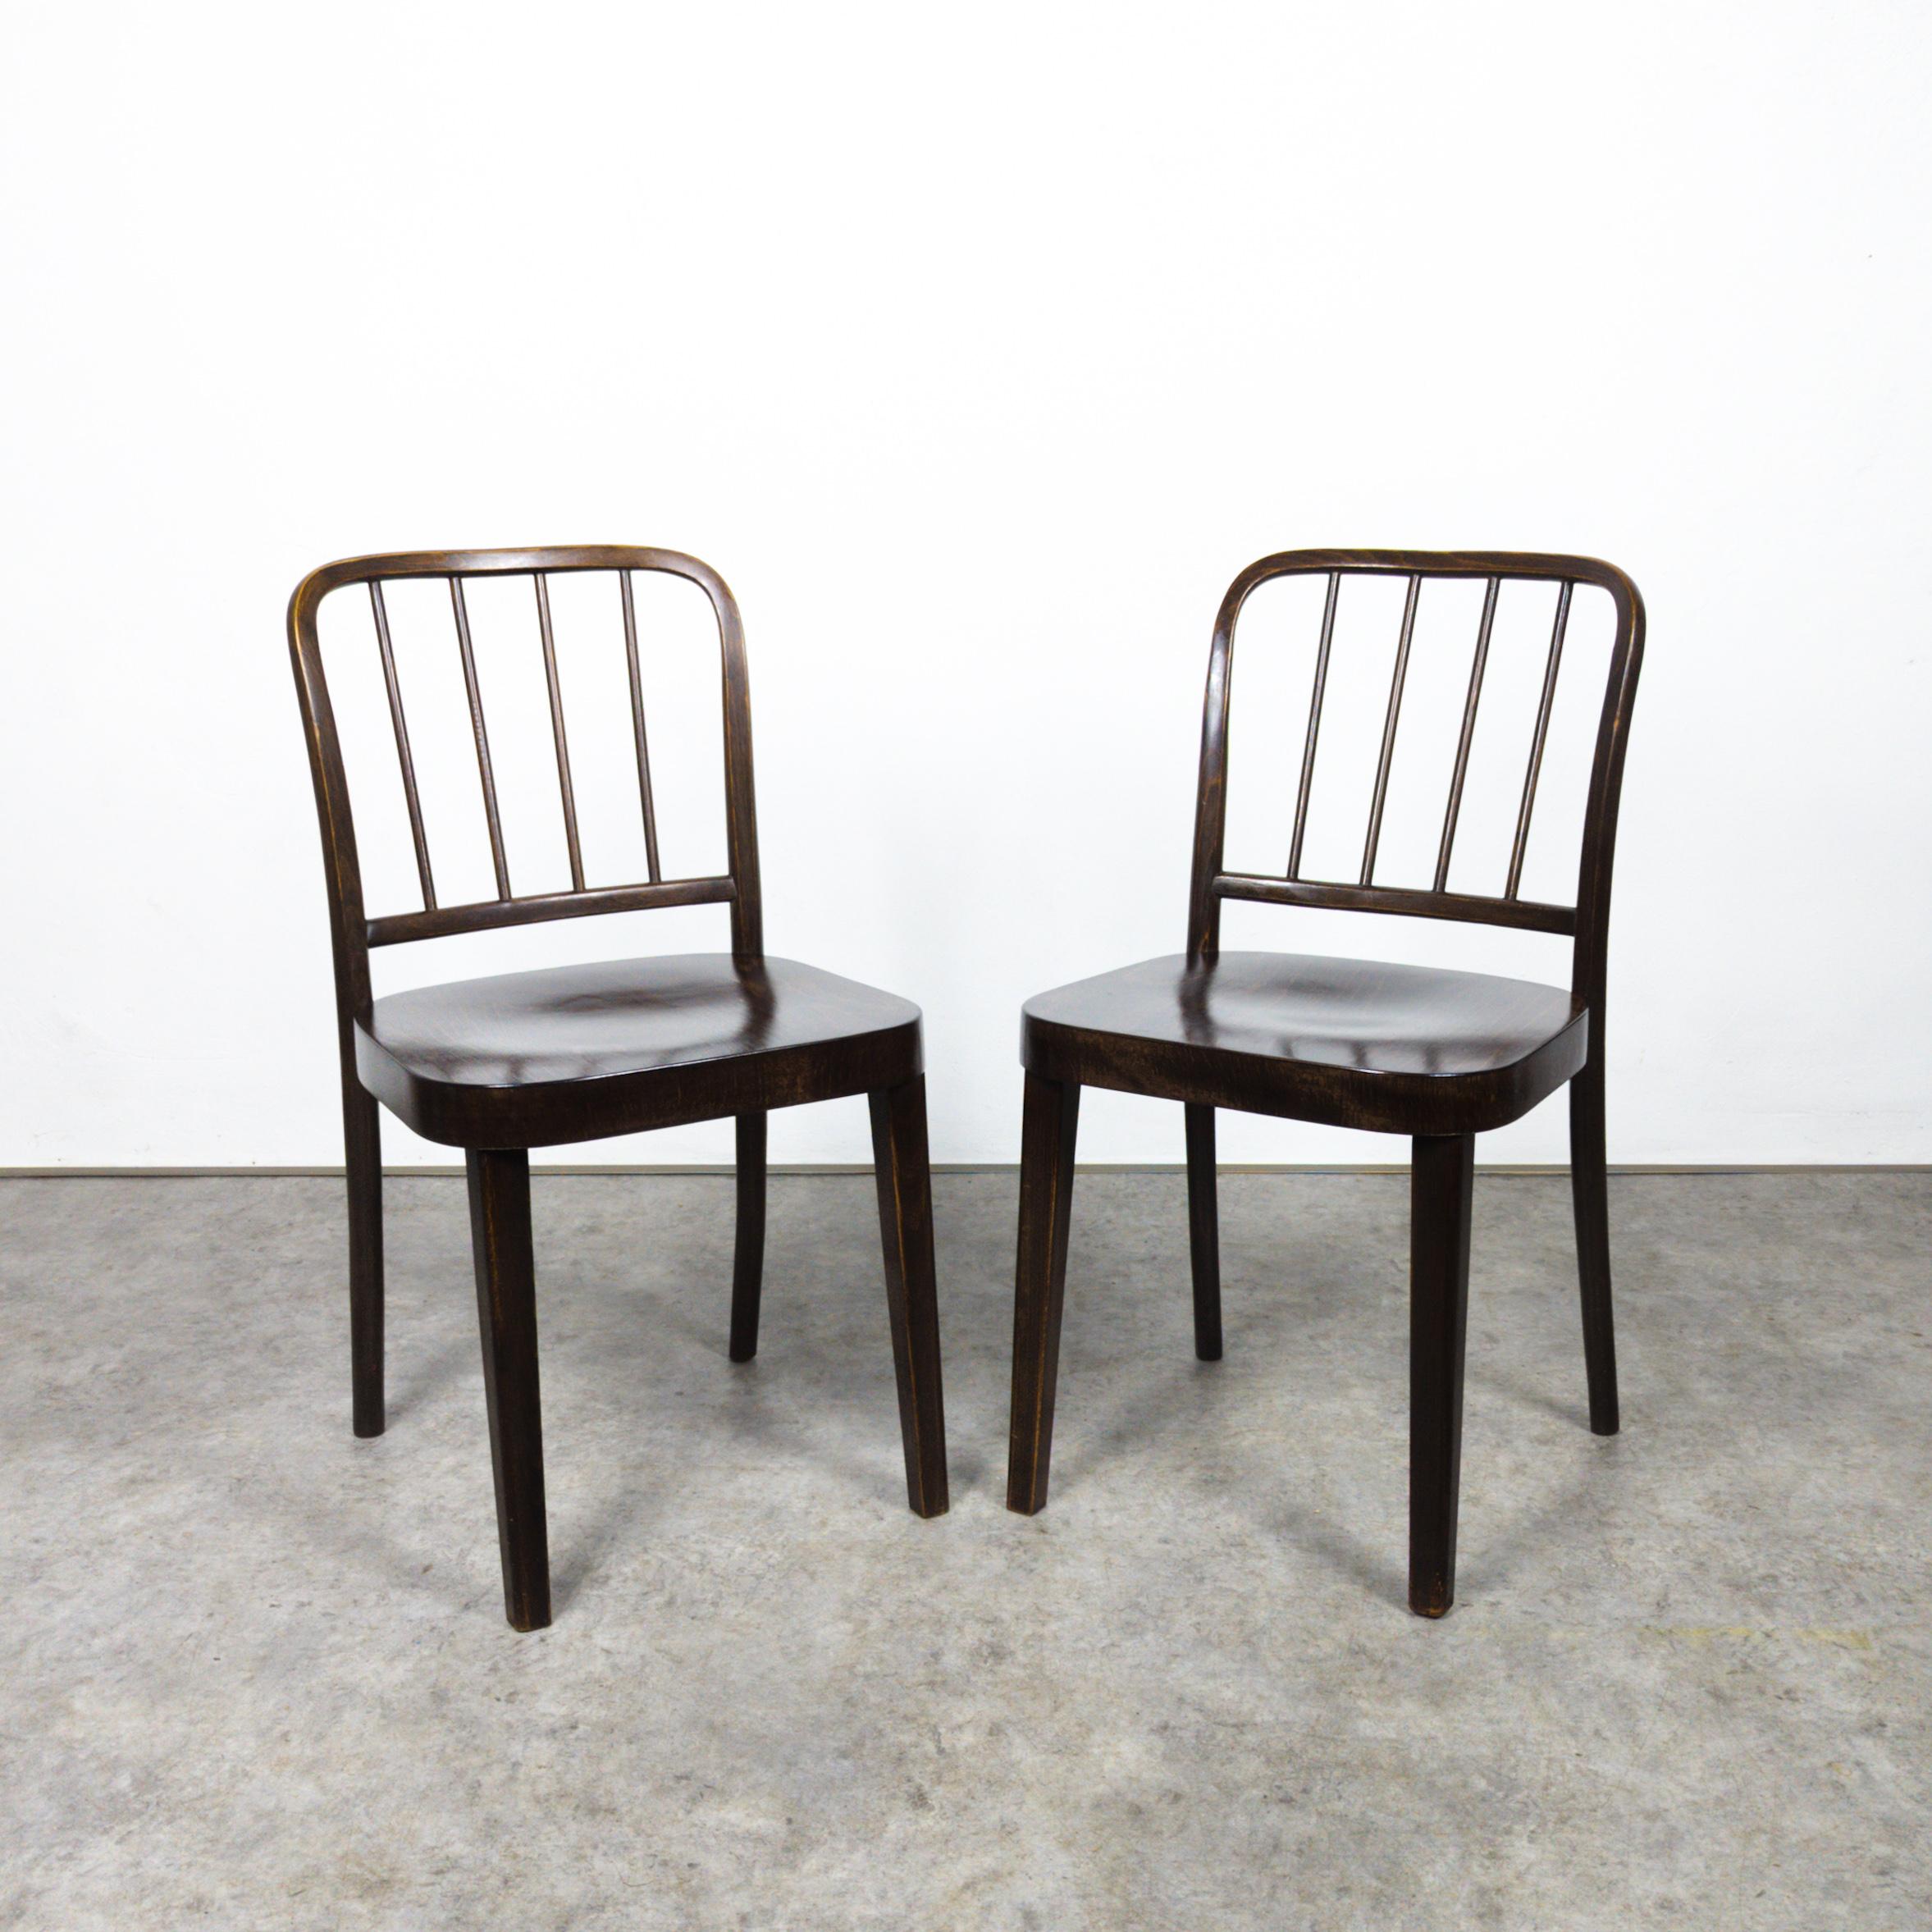 Rare set of four Thonet A 811/4 chairs by Josef Hoffmann For Sale 2